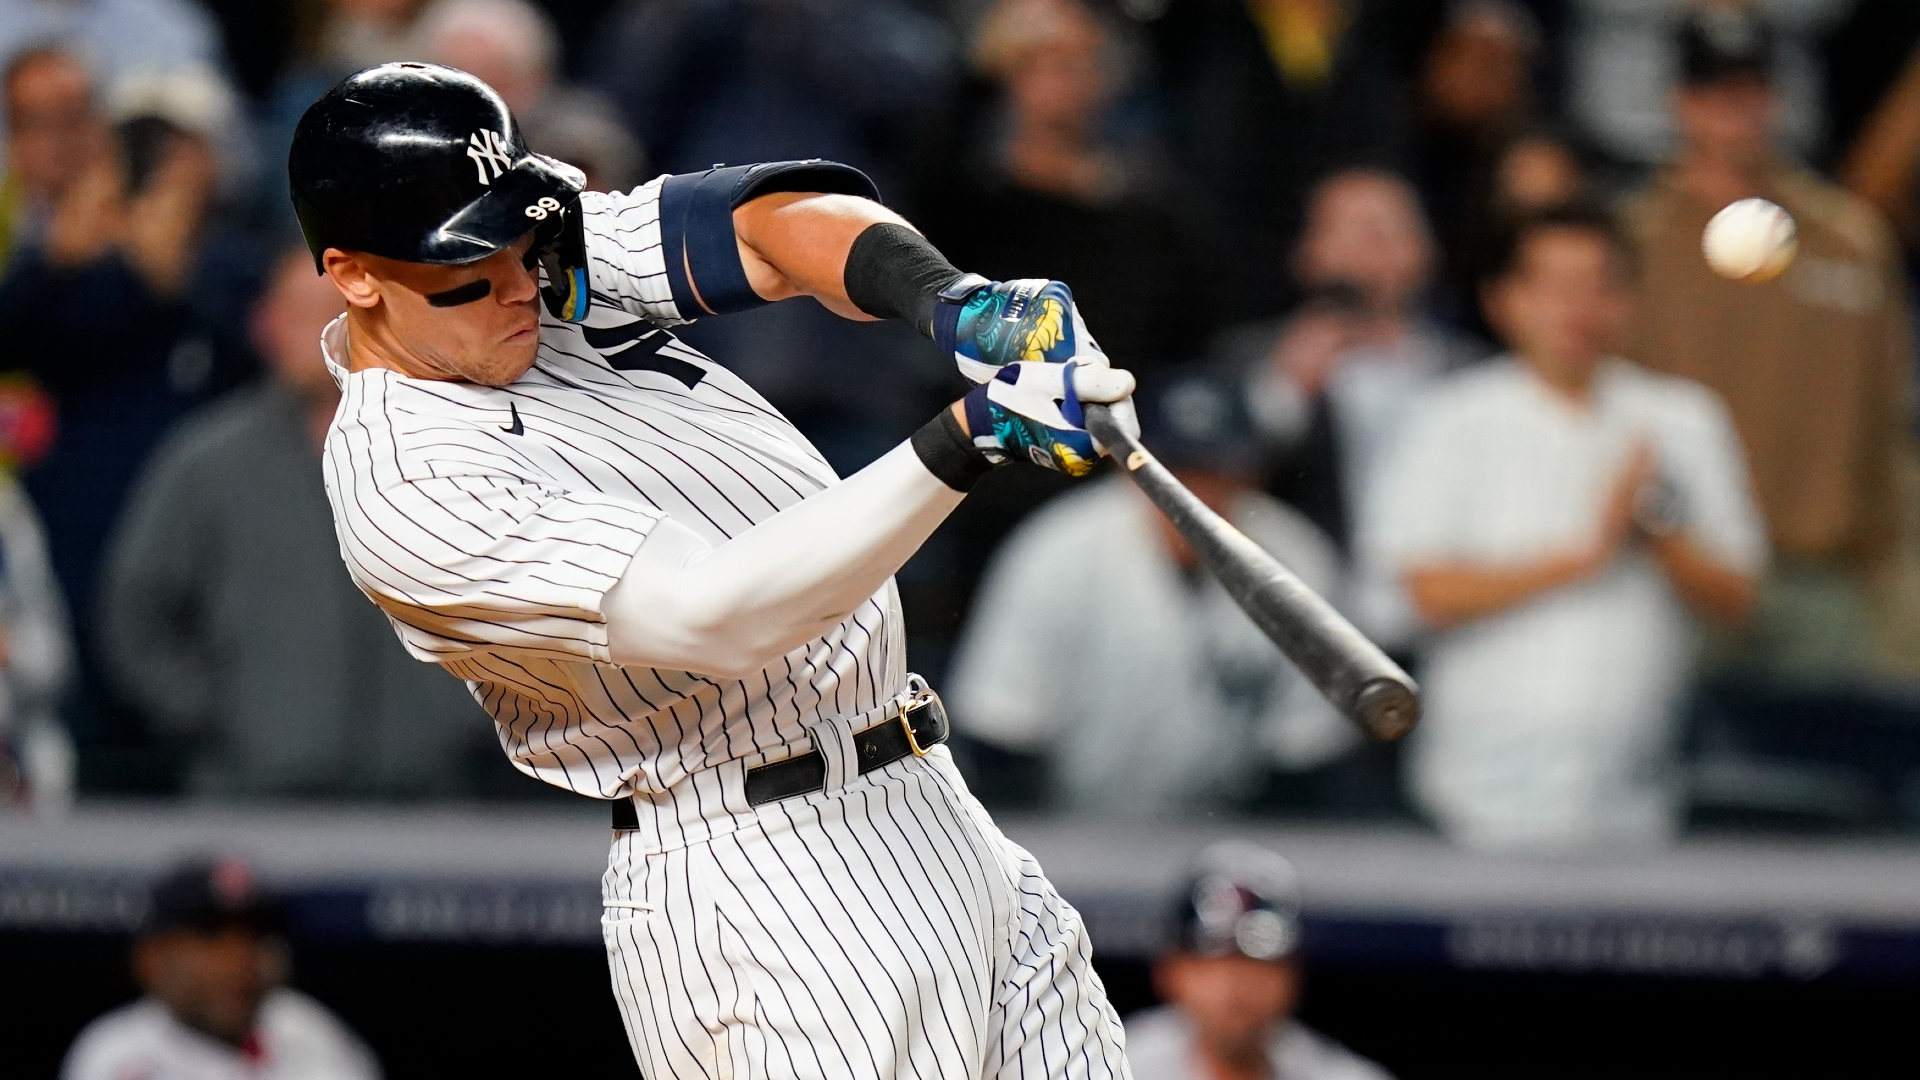 Why Red Sox fans should want the Yankees to sign Aaron Judge